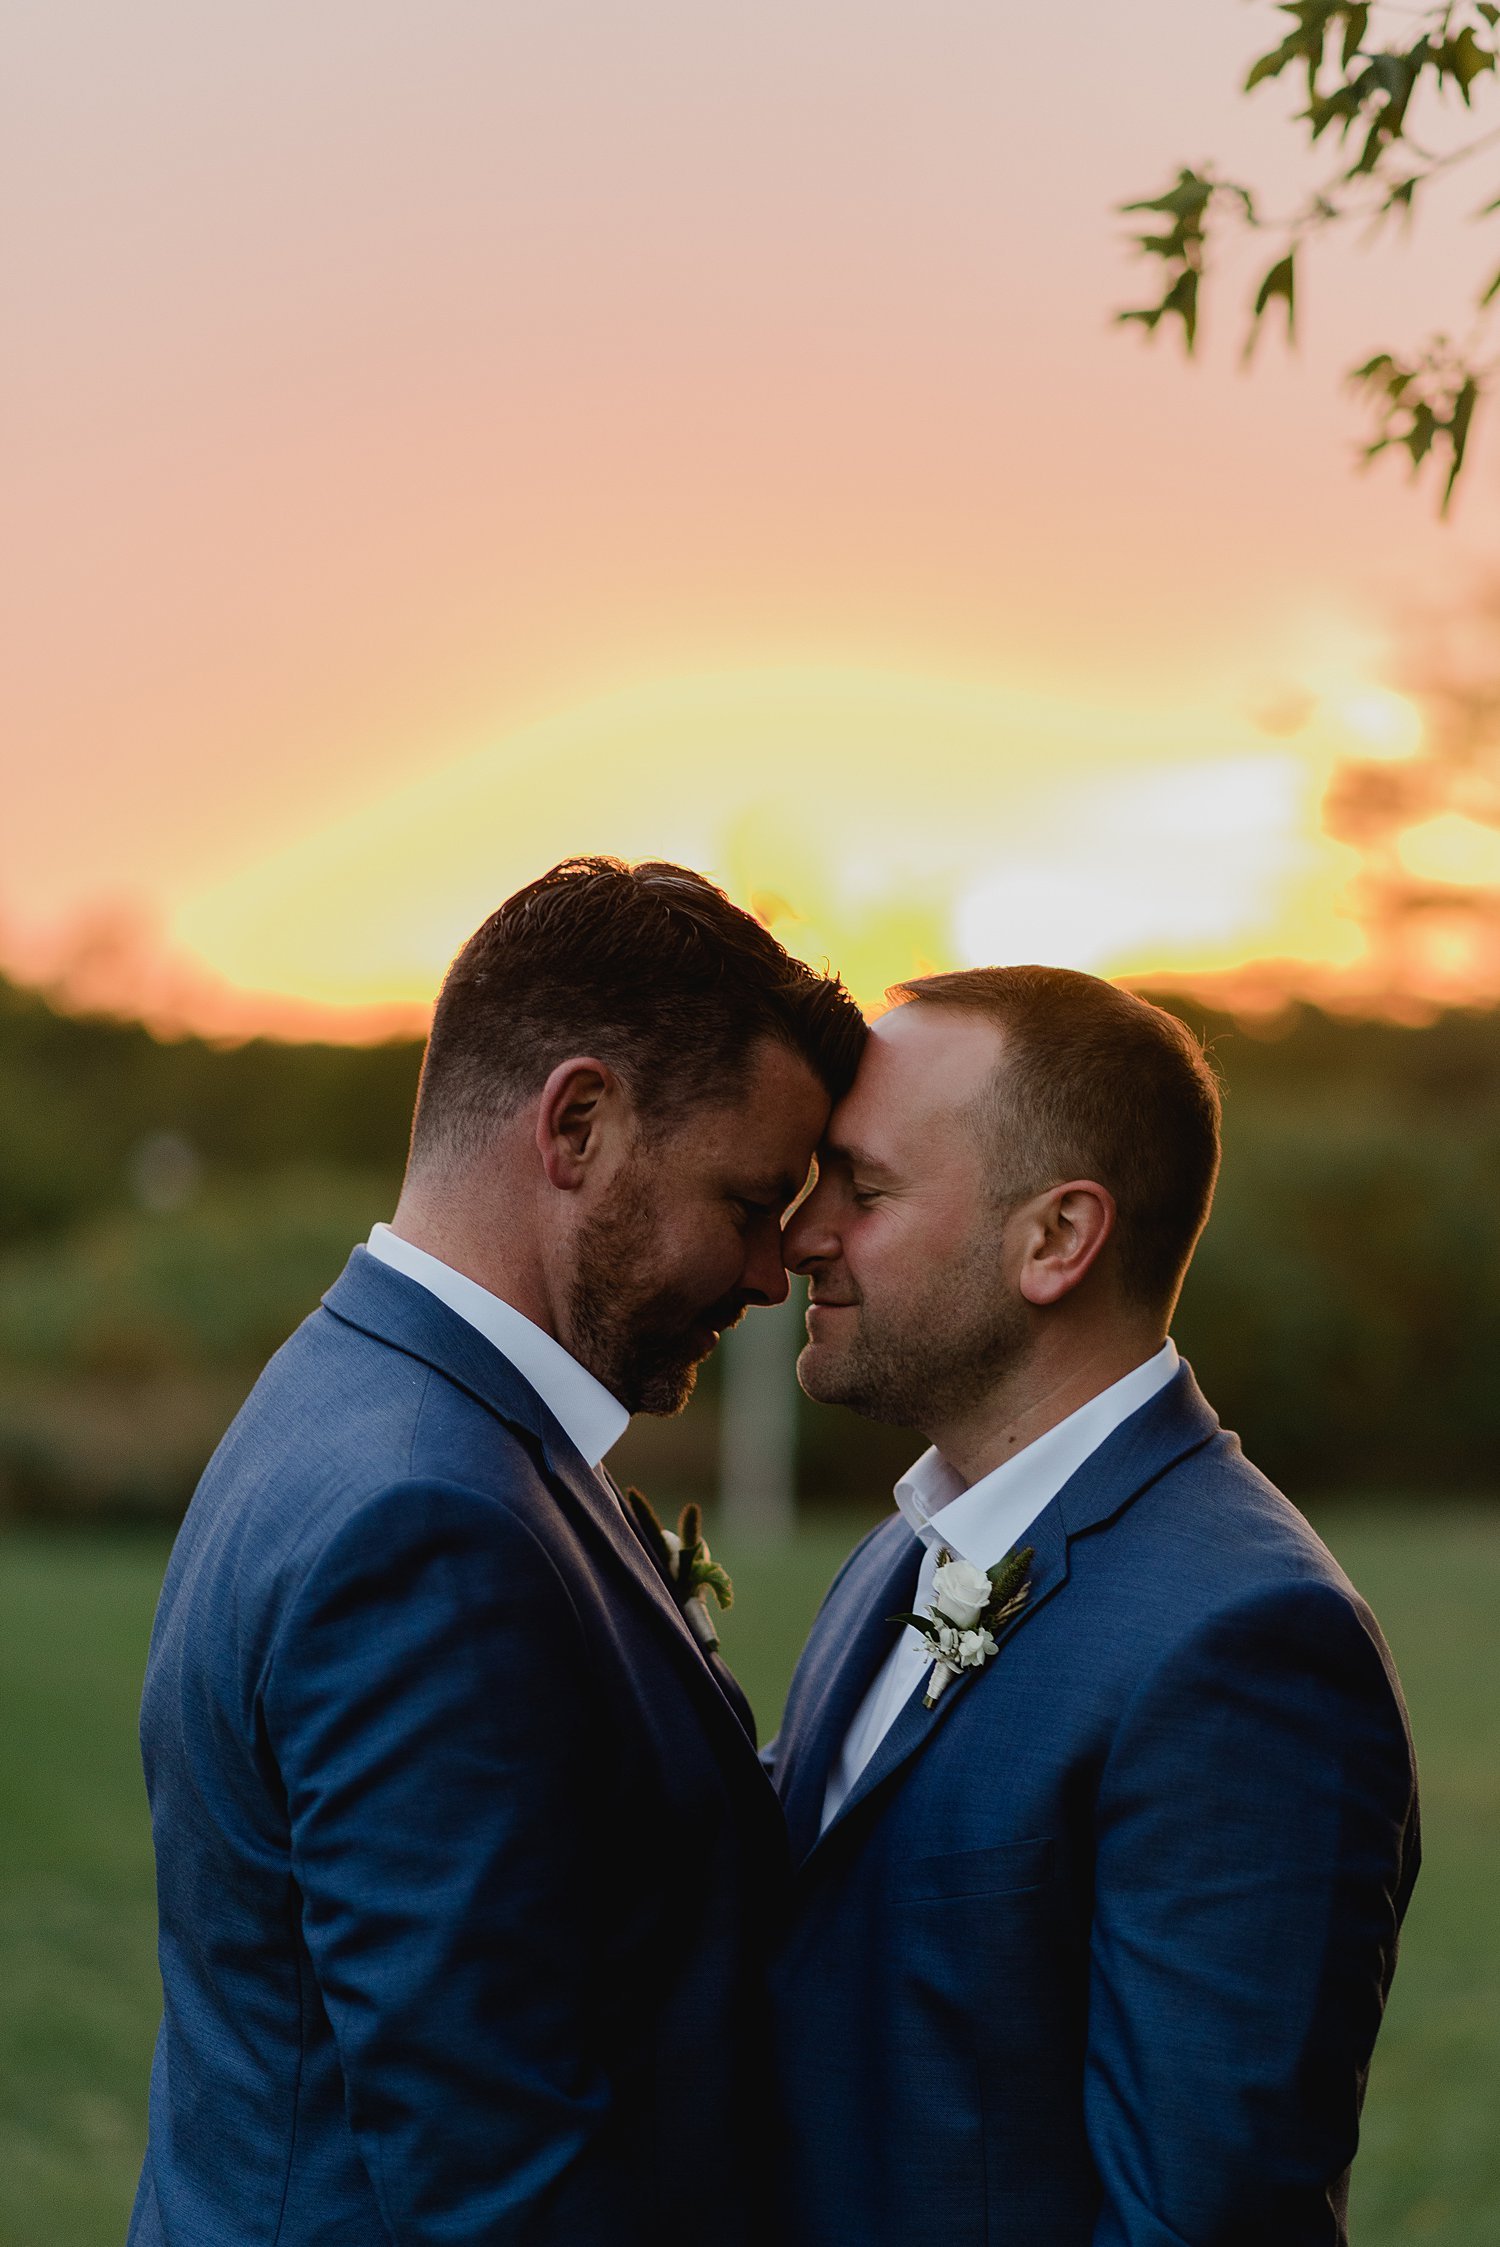 An Intimate Elopement at an Airbnb in Prince Edward County | Prince Edward County Wedding Photographer | Holly McMurter Photographs_0069.jpg